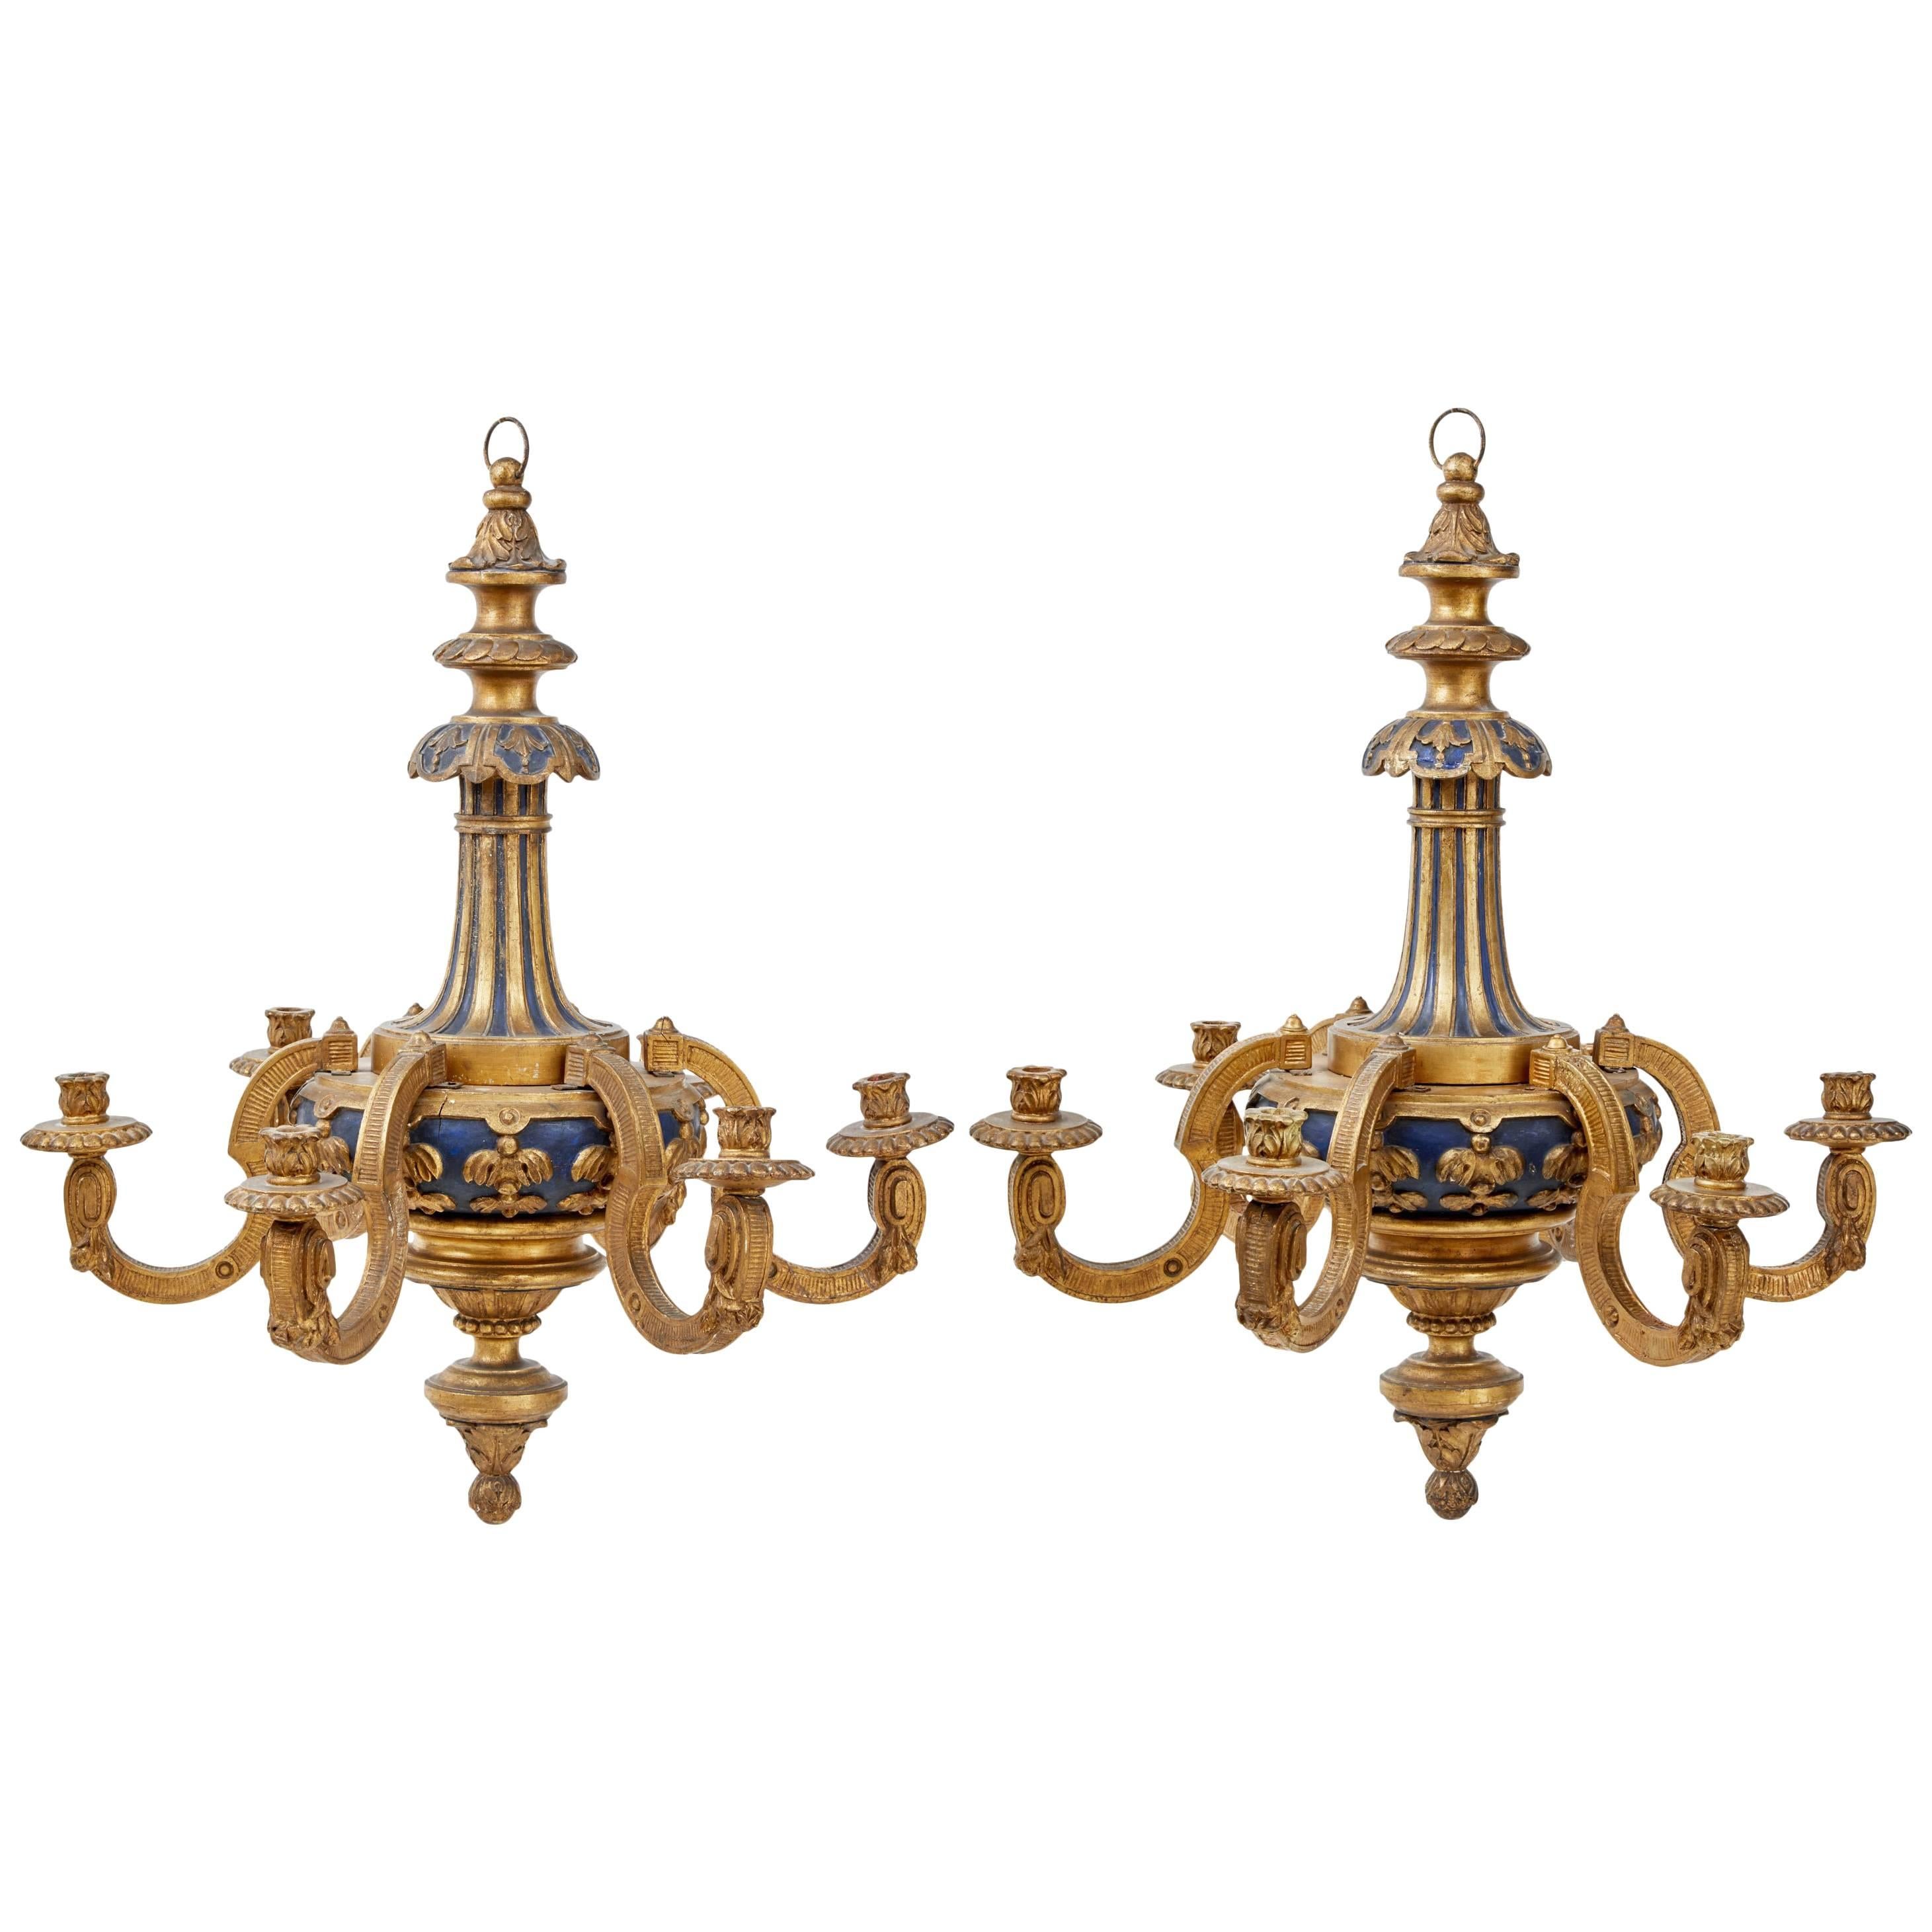 Pair of Rare Carved Wood and Gilt French Early 20th Century Chandeliers